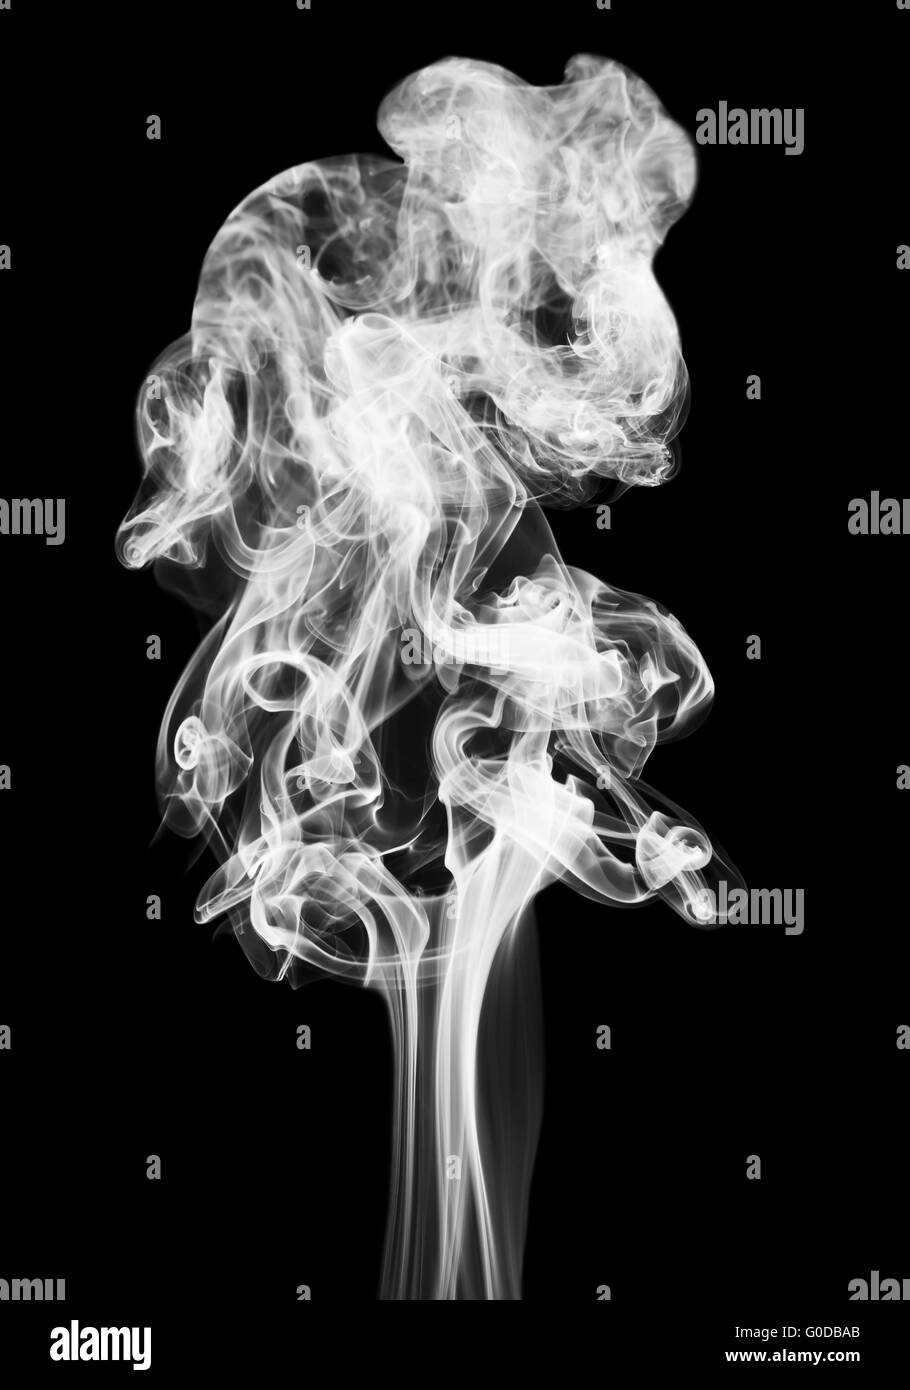 Premium Photo  Close up of steam smoke on black background. white hot  curly steam smoke isolated on black background, close-up. create mystical  halloween photos. abstract background, design element